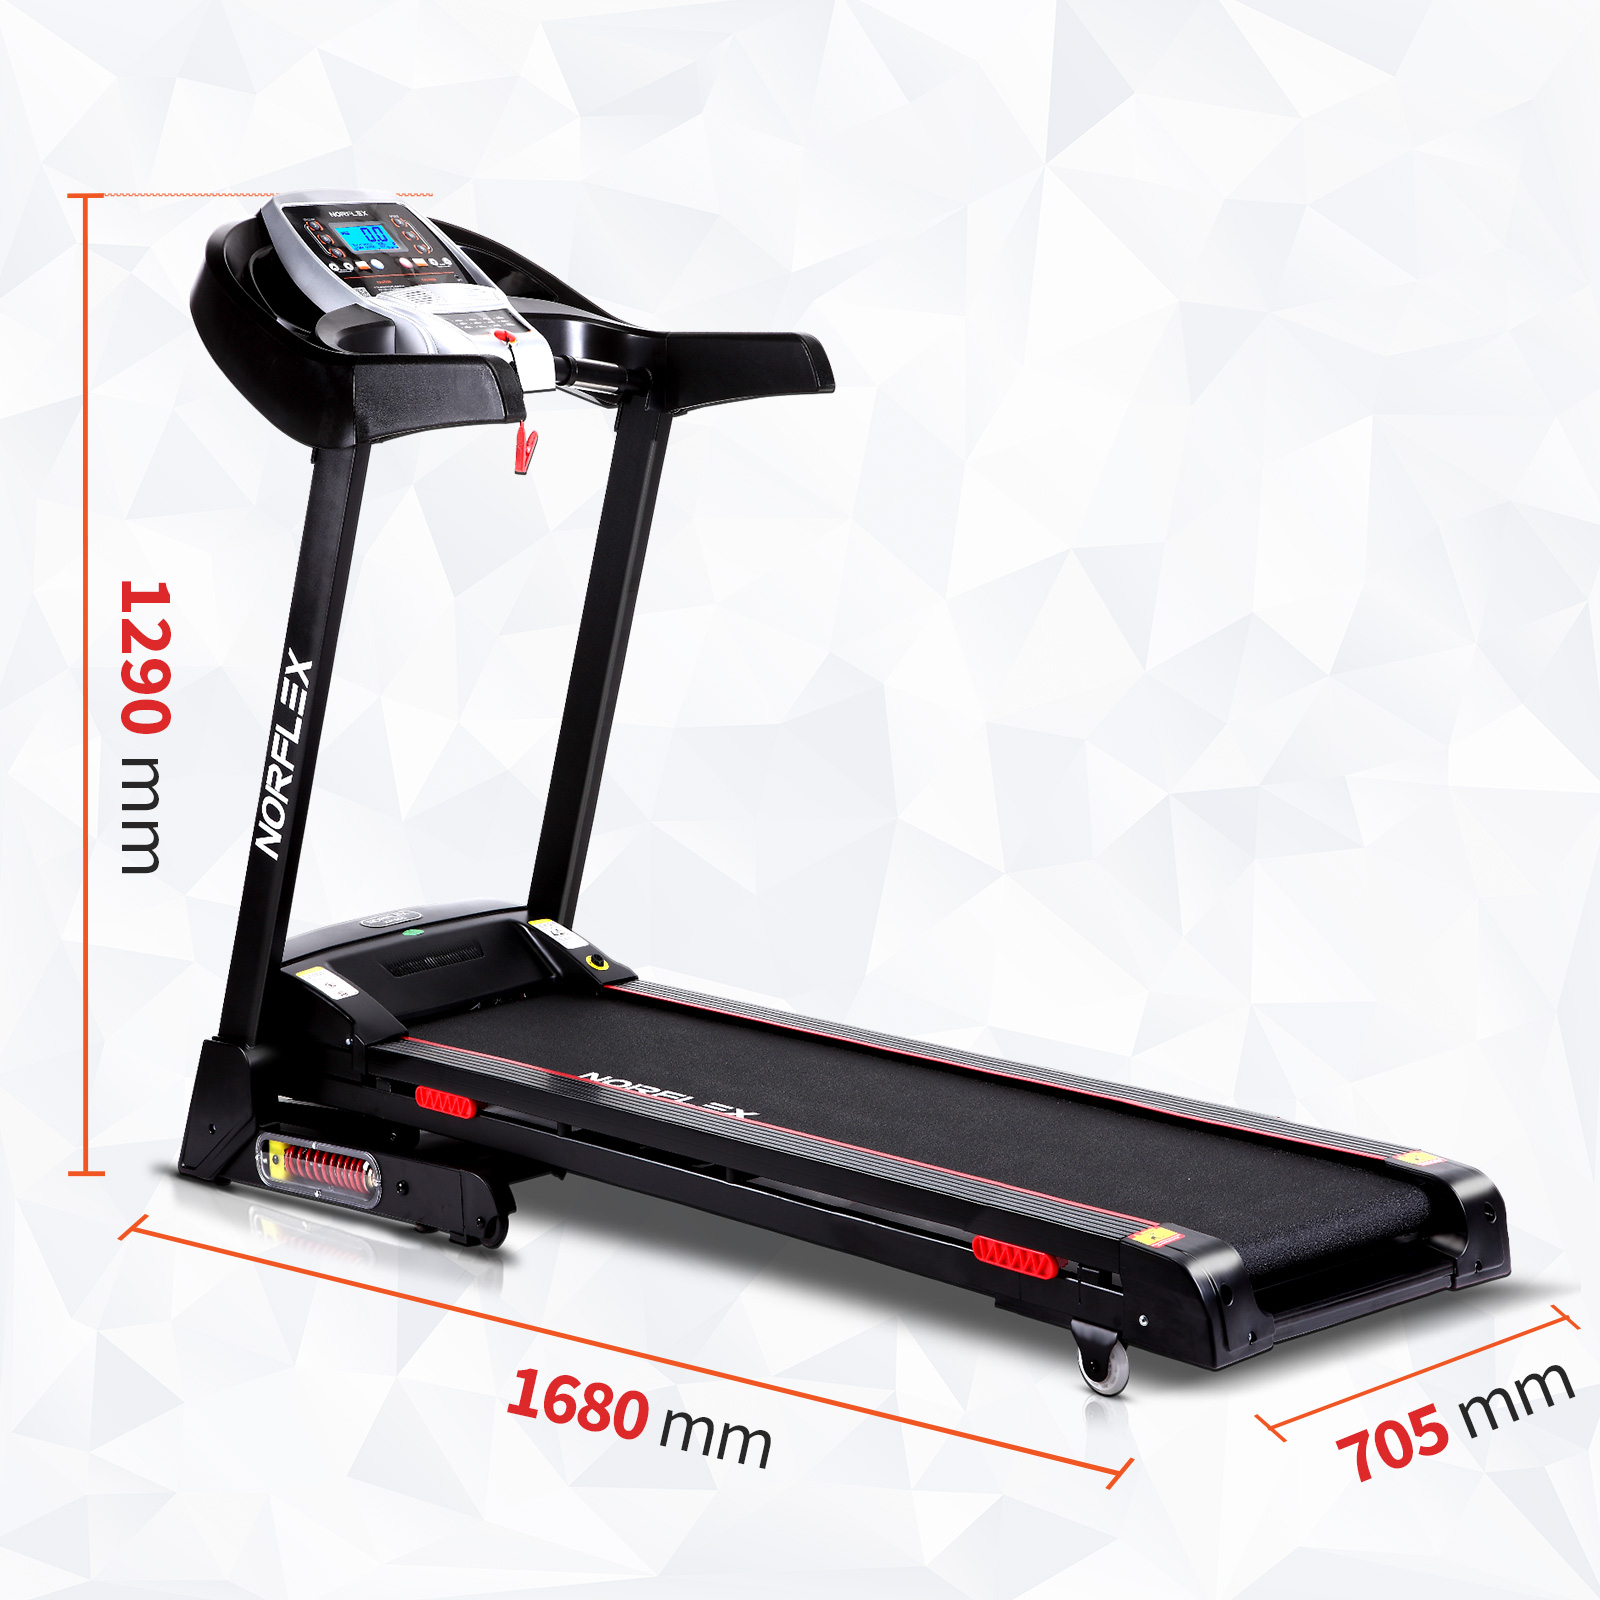 NEW NORFLX Electric Treadmill with Auto Incline - Home Gym Exercise Fitness Machine